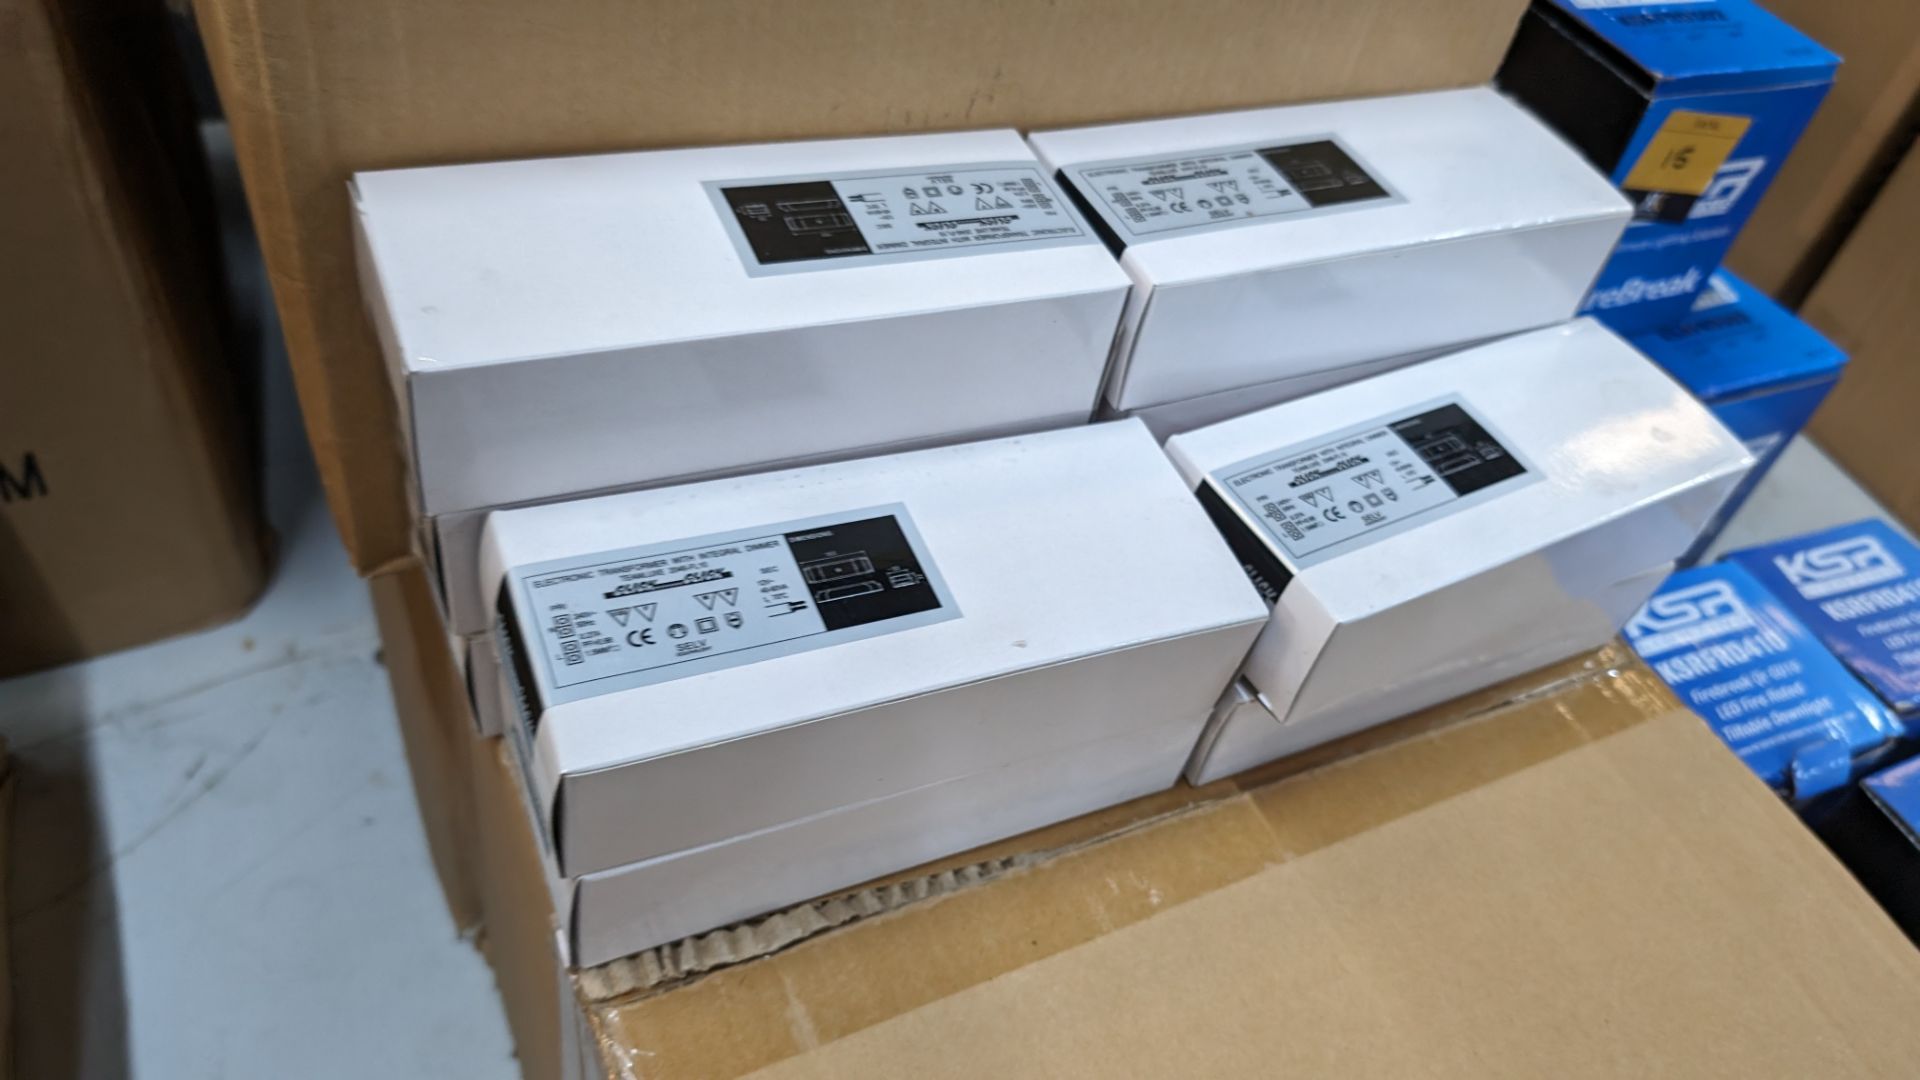 210 off Teamluxe electronic transformers with integral dimmer (5 boxes plus 10 loose transformers) - Image 3 of 5